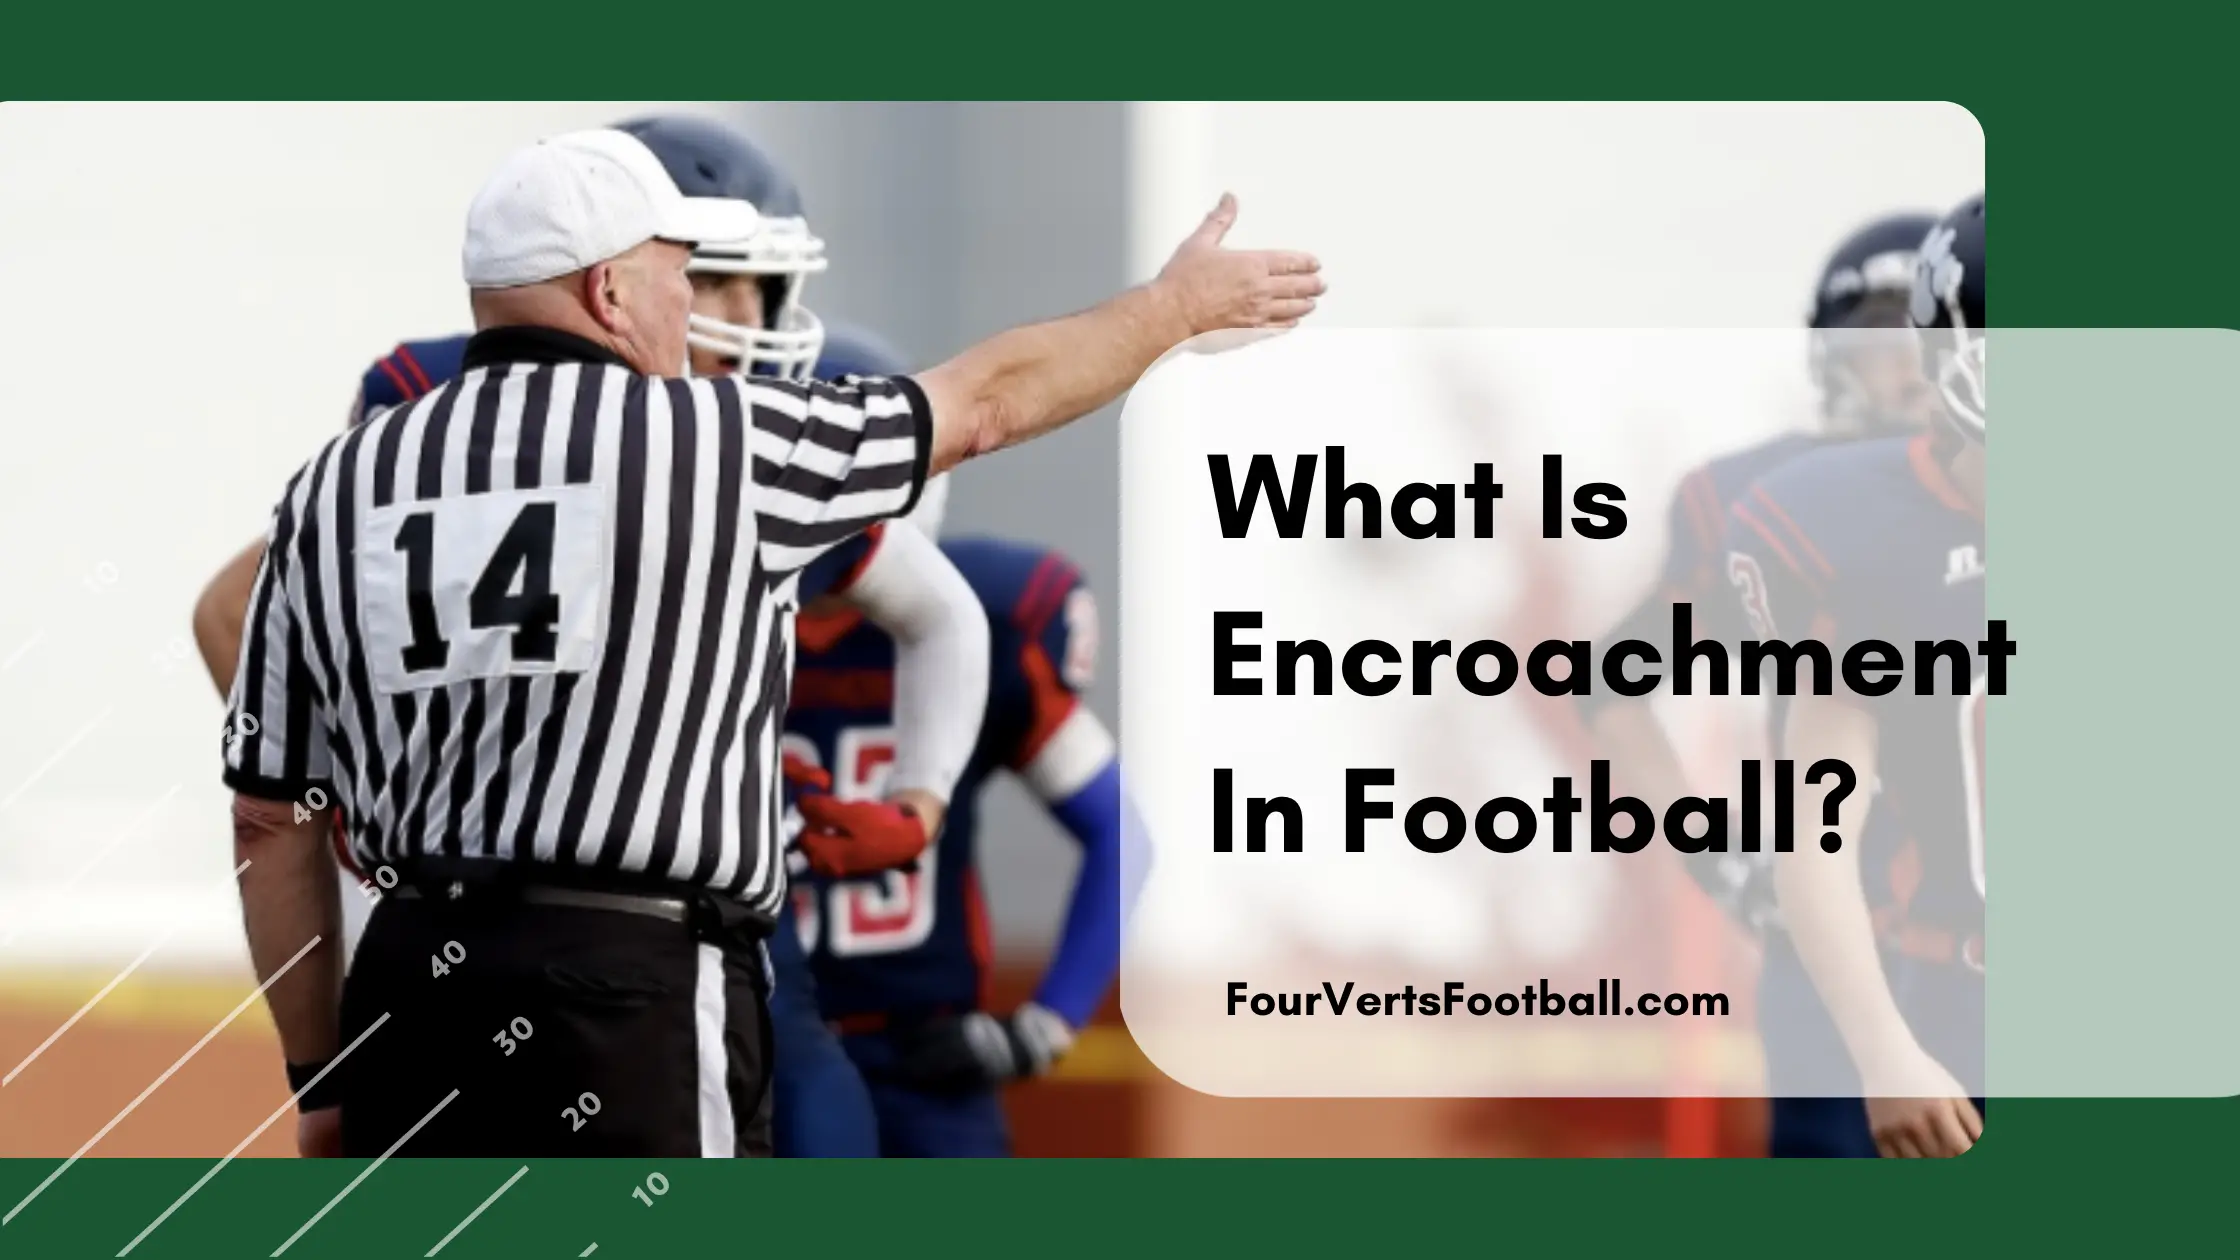 What Is Encroachment In Football?